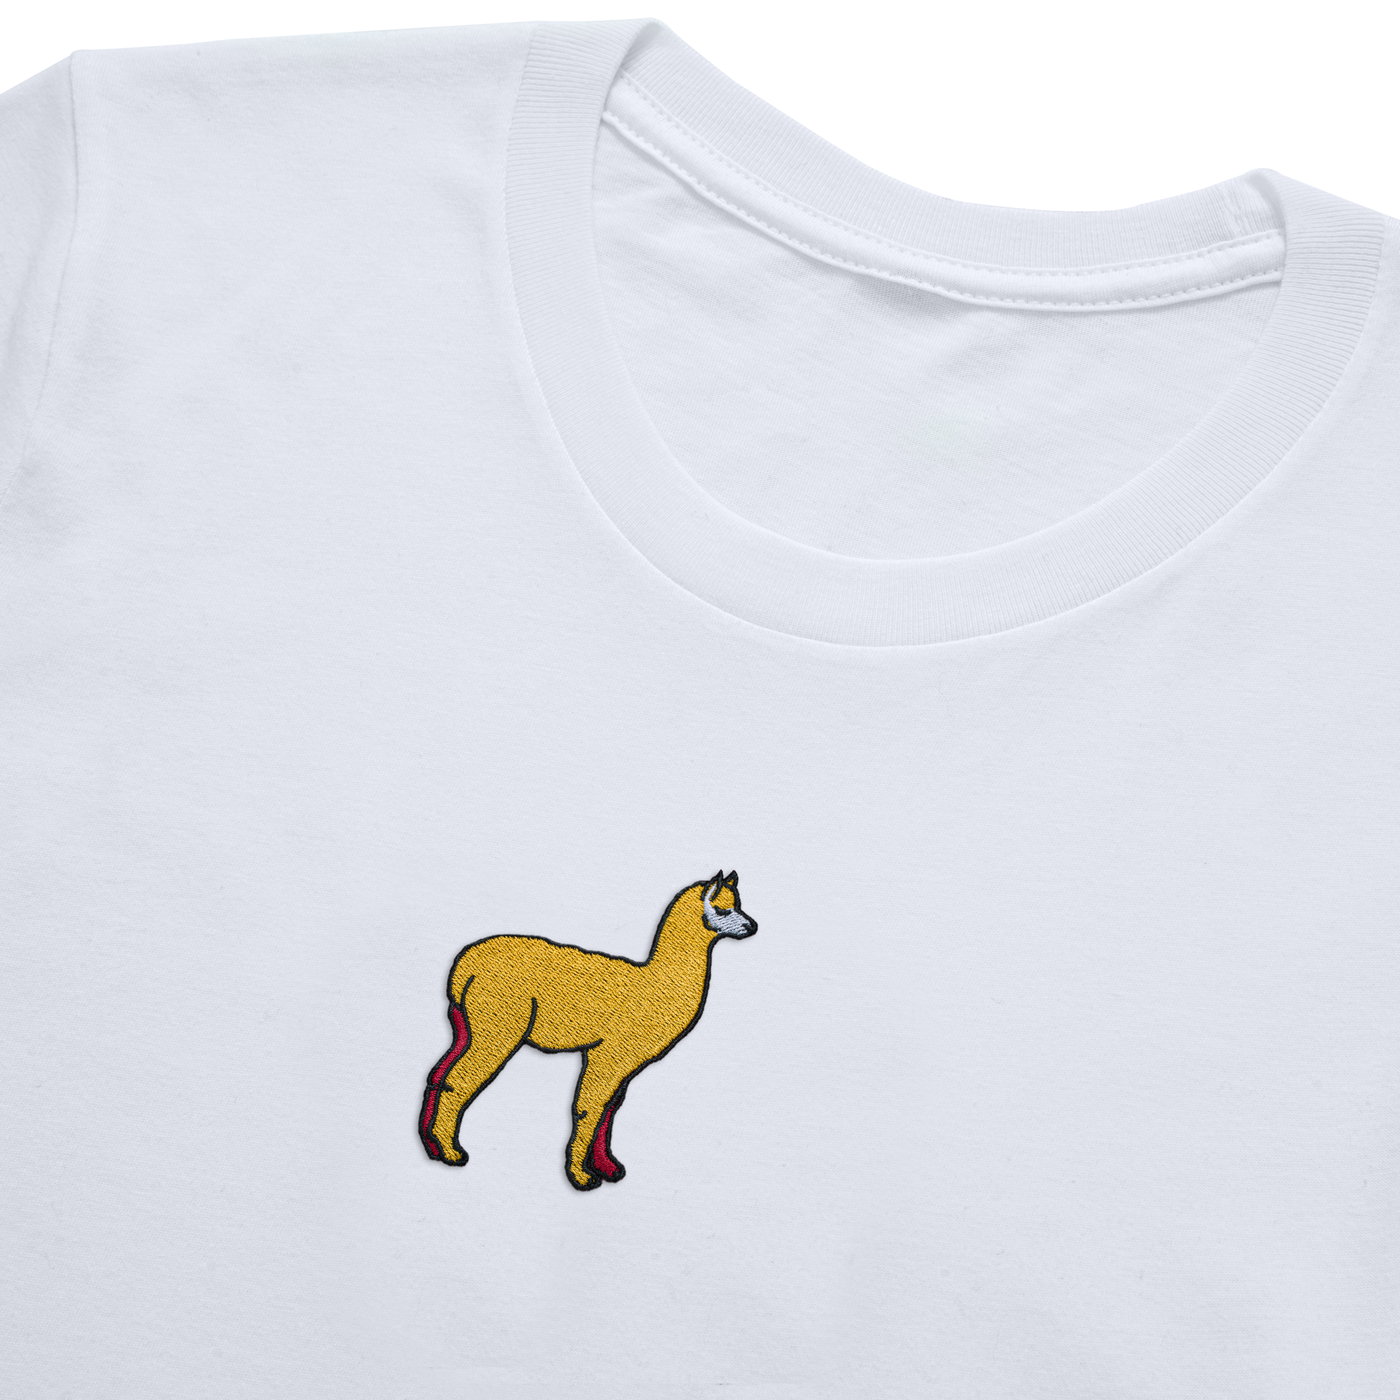 Bobby's Planet Kids Embroidered Alpaca T-Shirt from South American Amazon Animals Collection in White Color#color_white